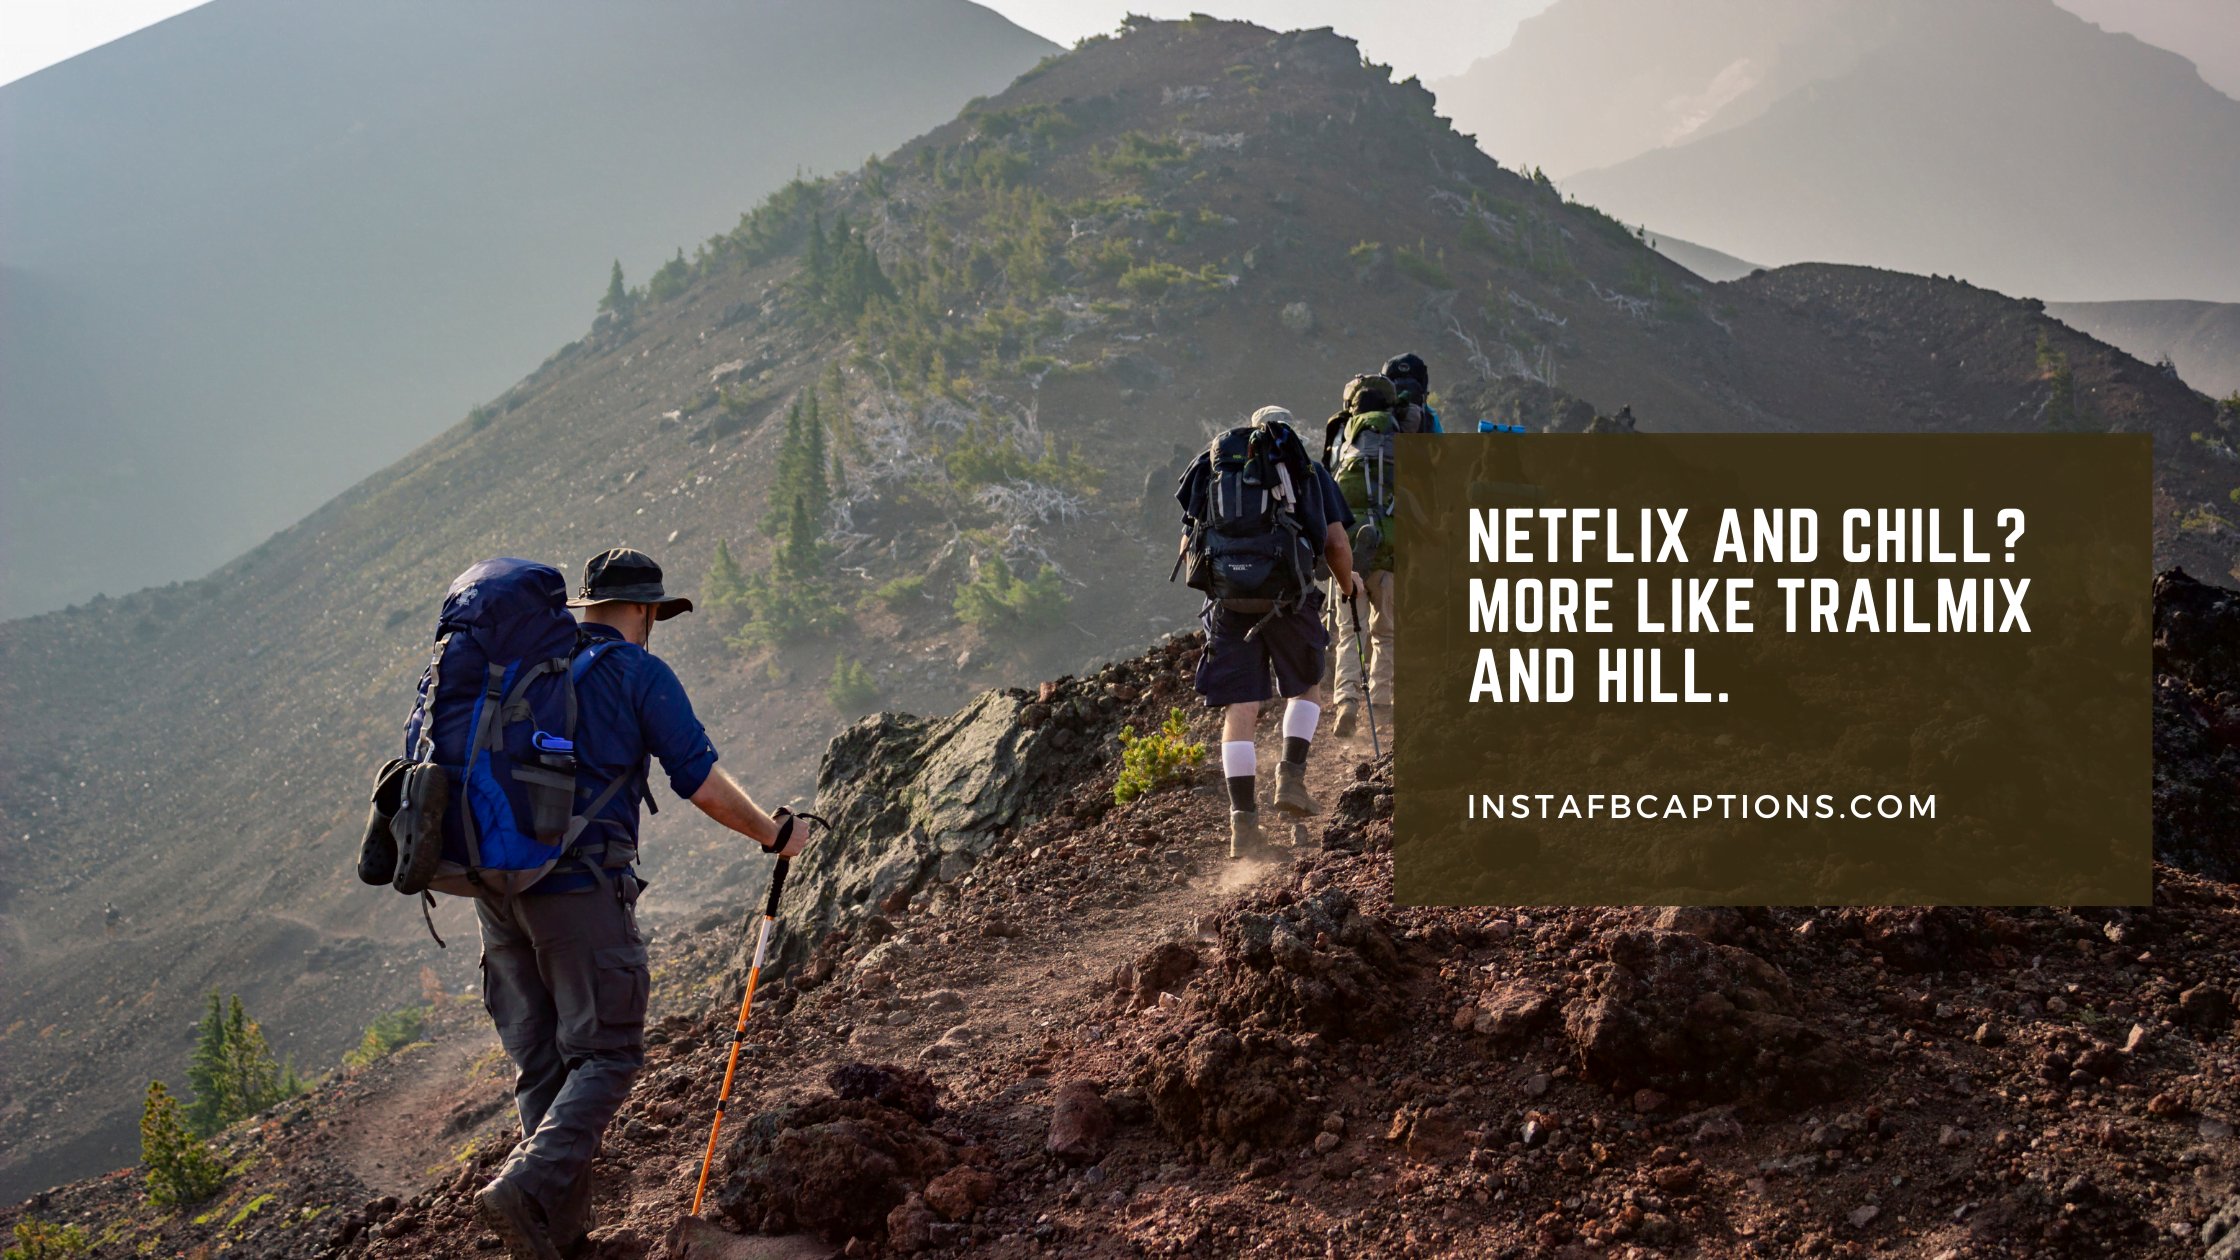 Some Amazing Hiking Puns  - Some Amazing Hiking Puns  - Mountain Hiking Instagram Captions in 2022